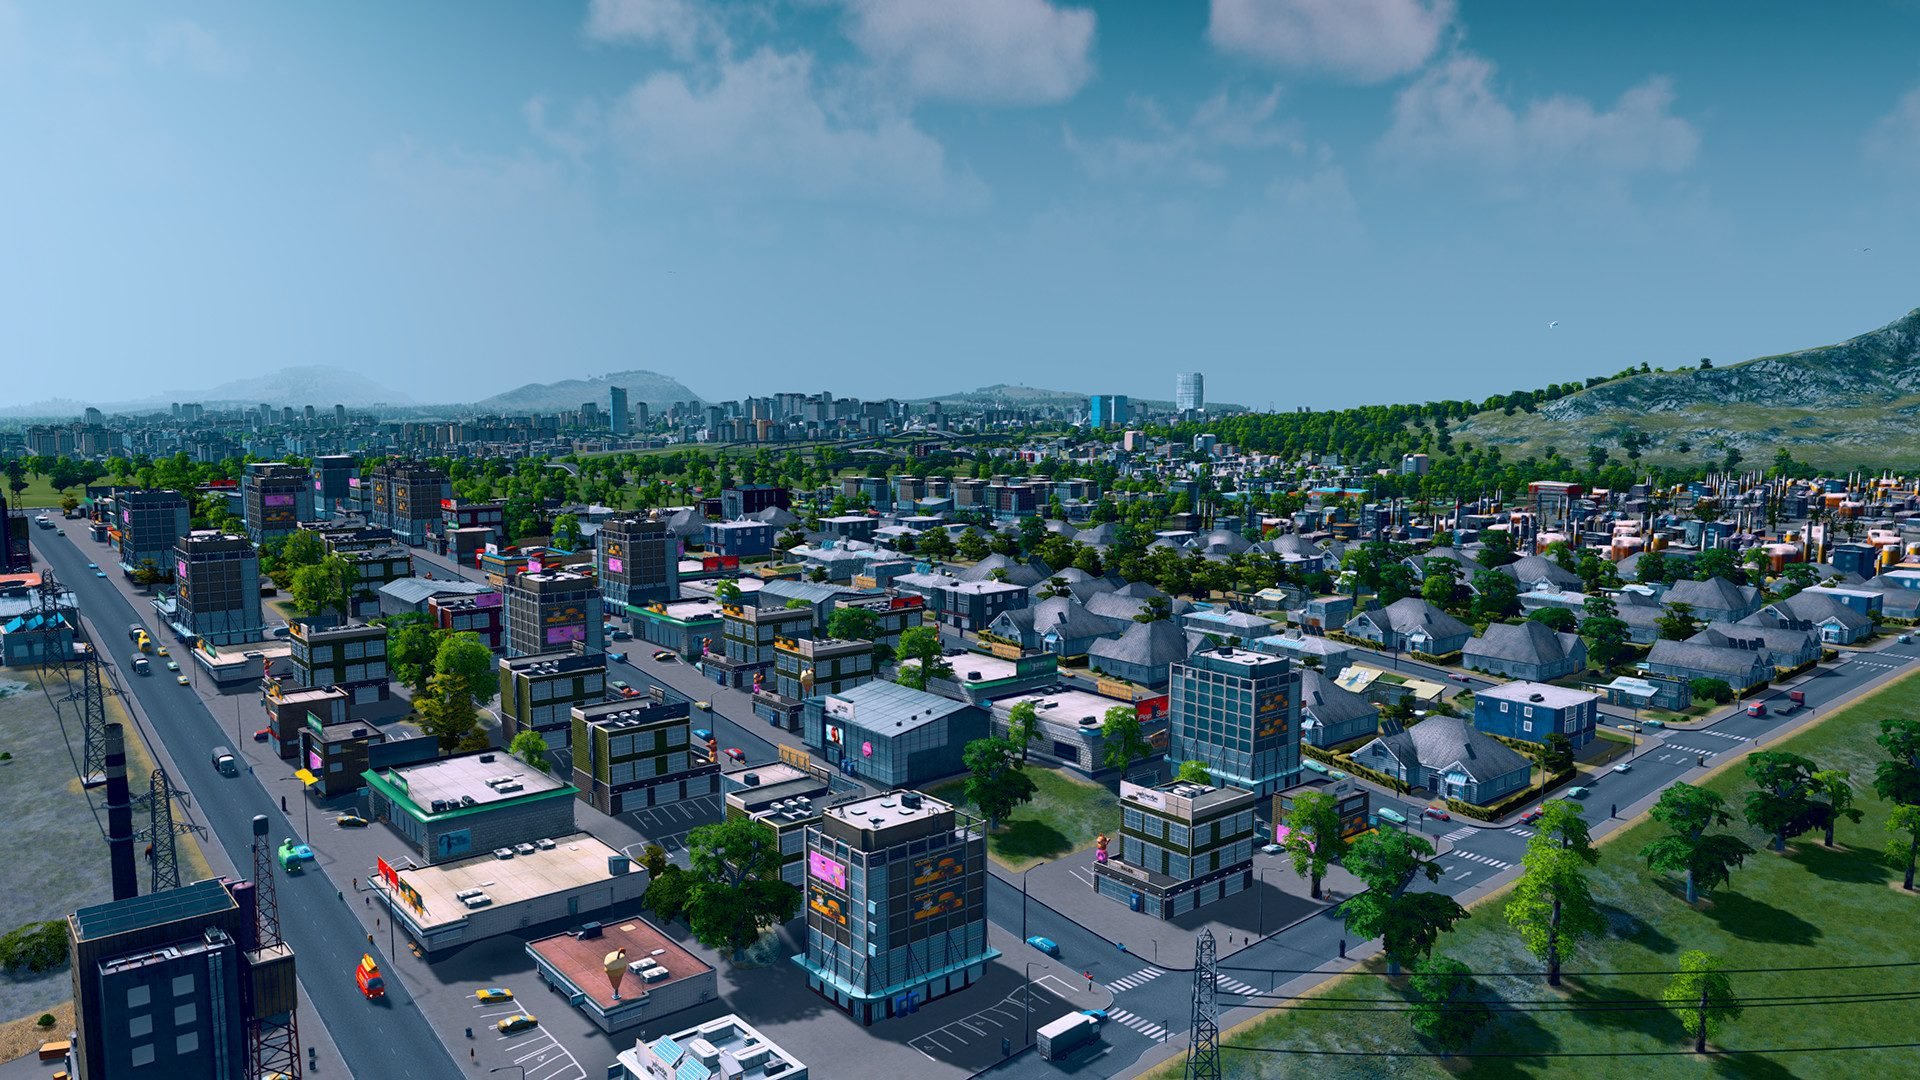 Chemie graven Pathologisch Cities: Skylines gets long-awaited Xbox One X upgrade | Windows Central